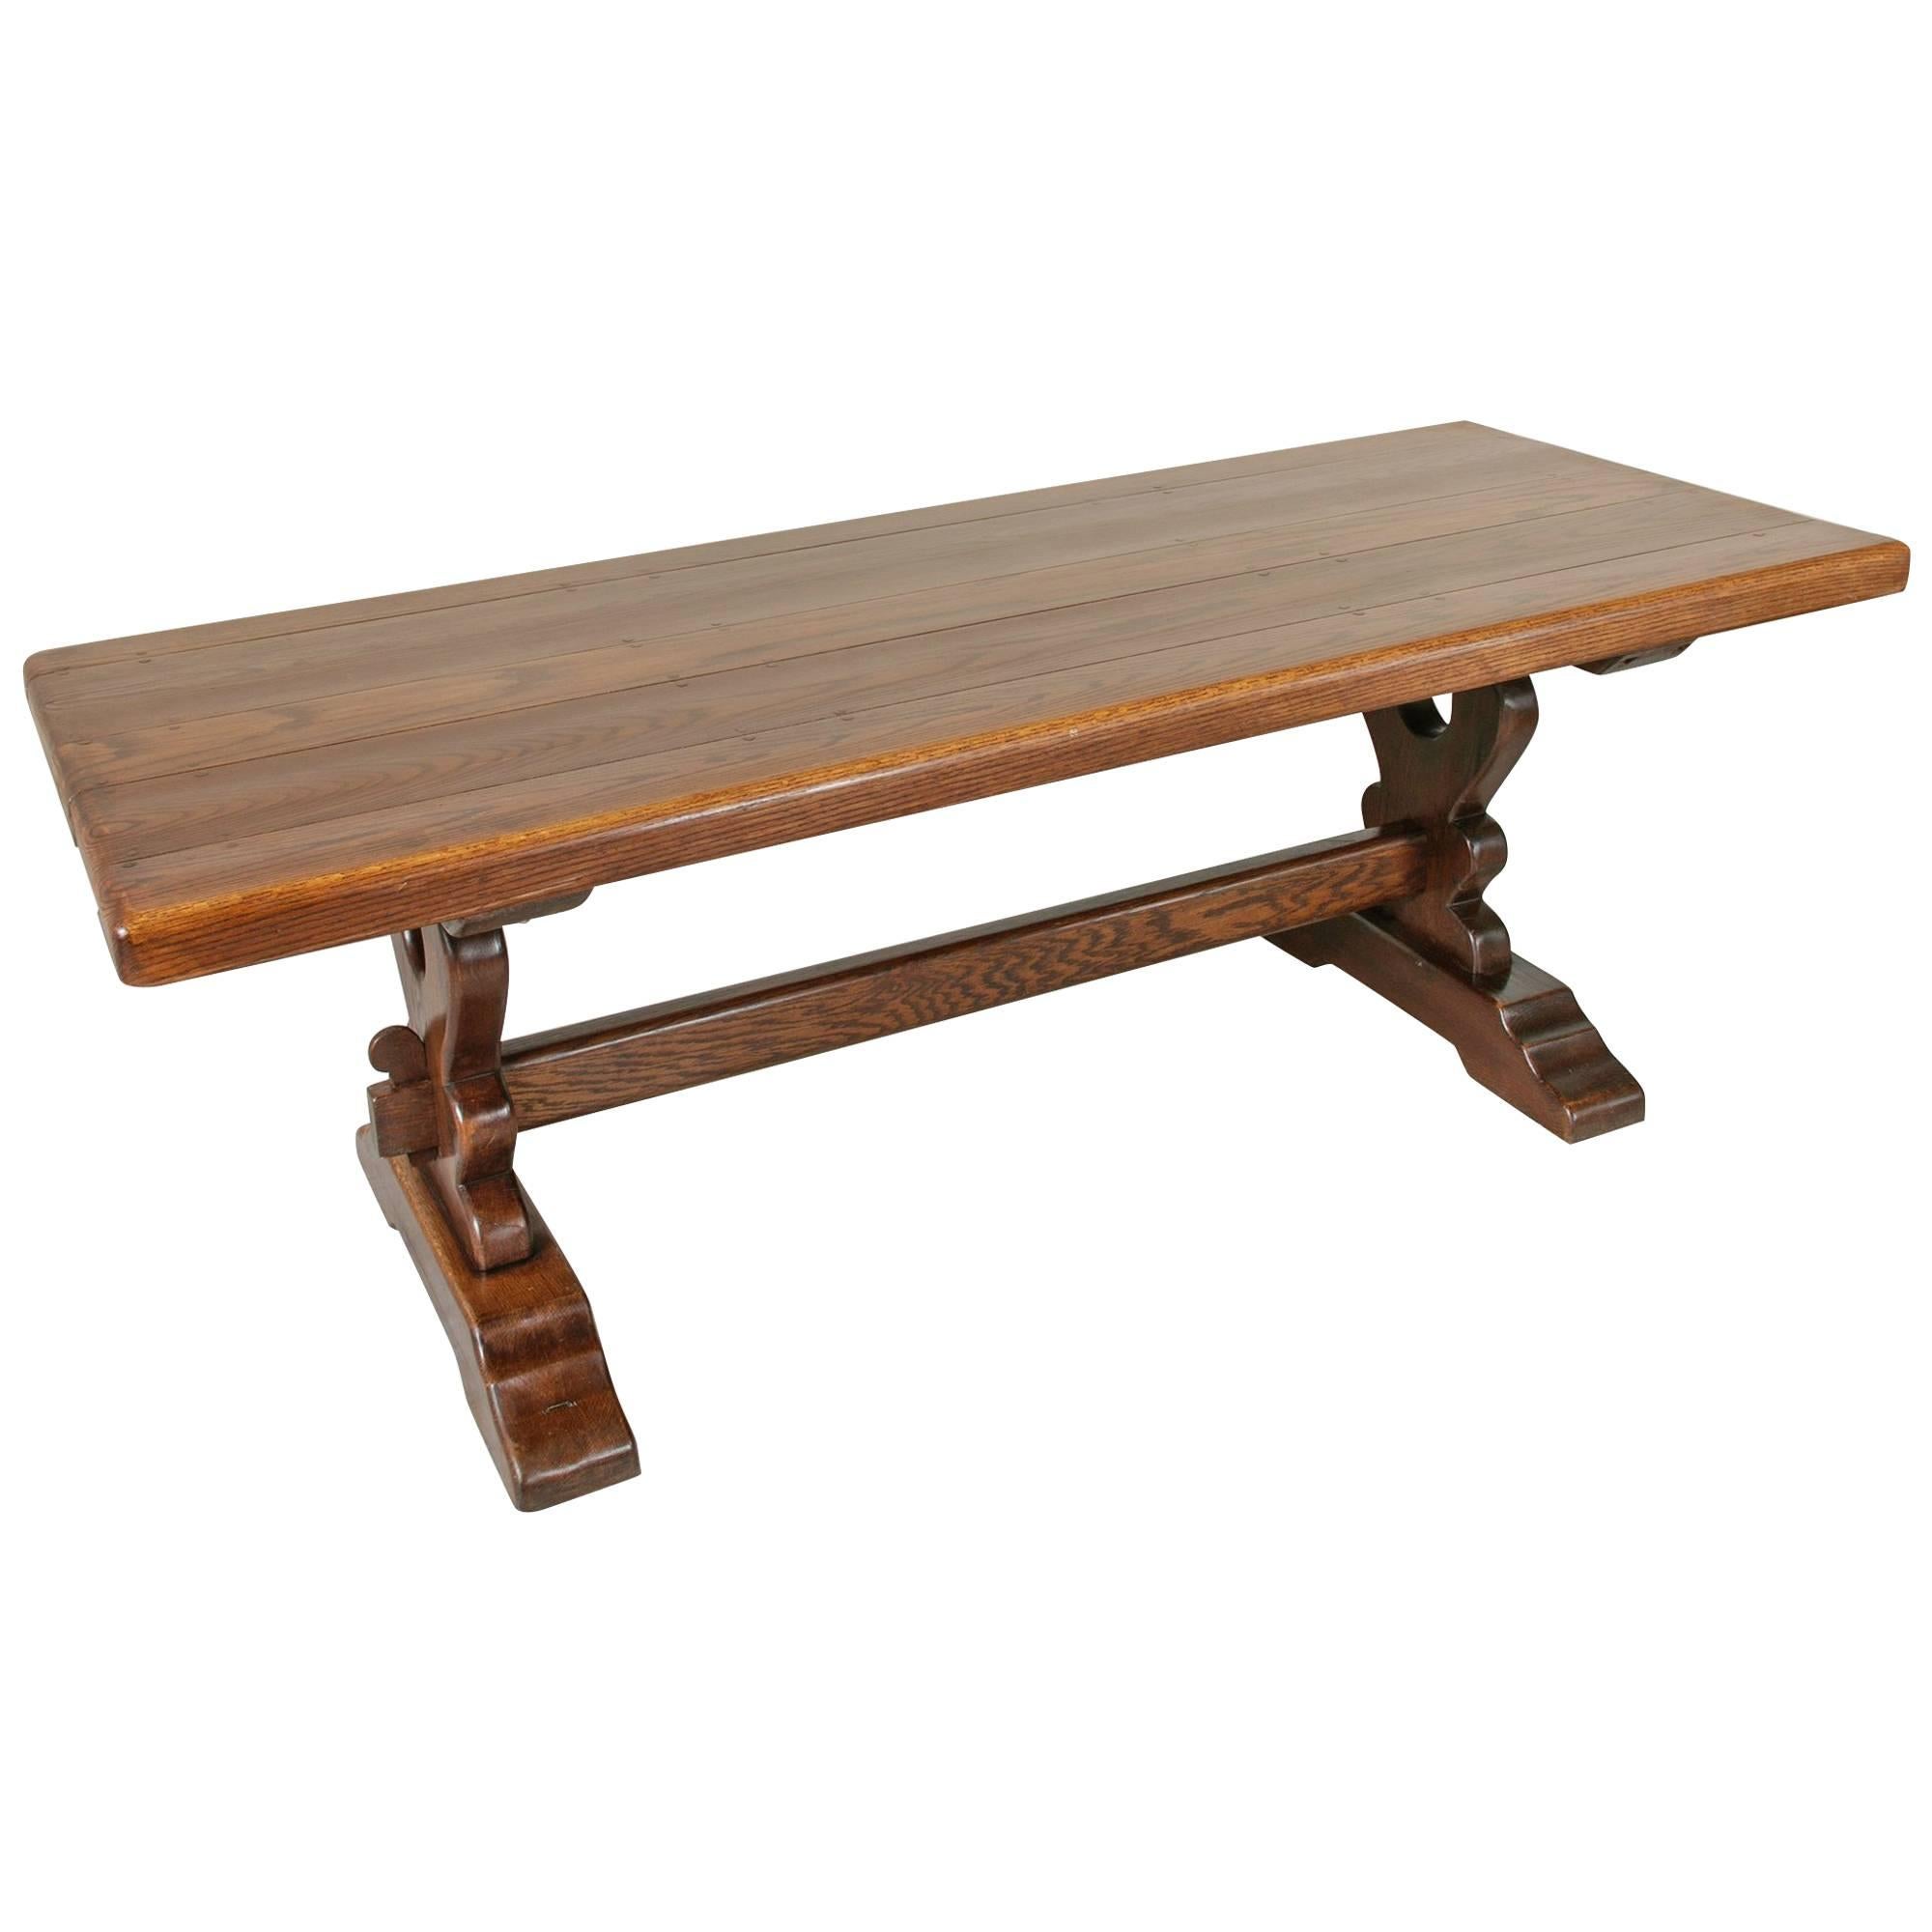 French Oak Farm Table Dining Table Trestle Table